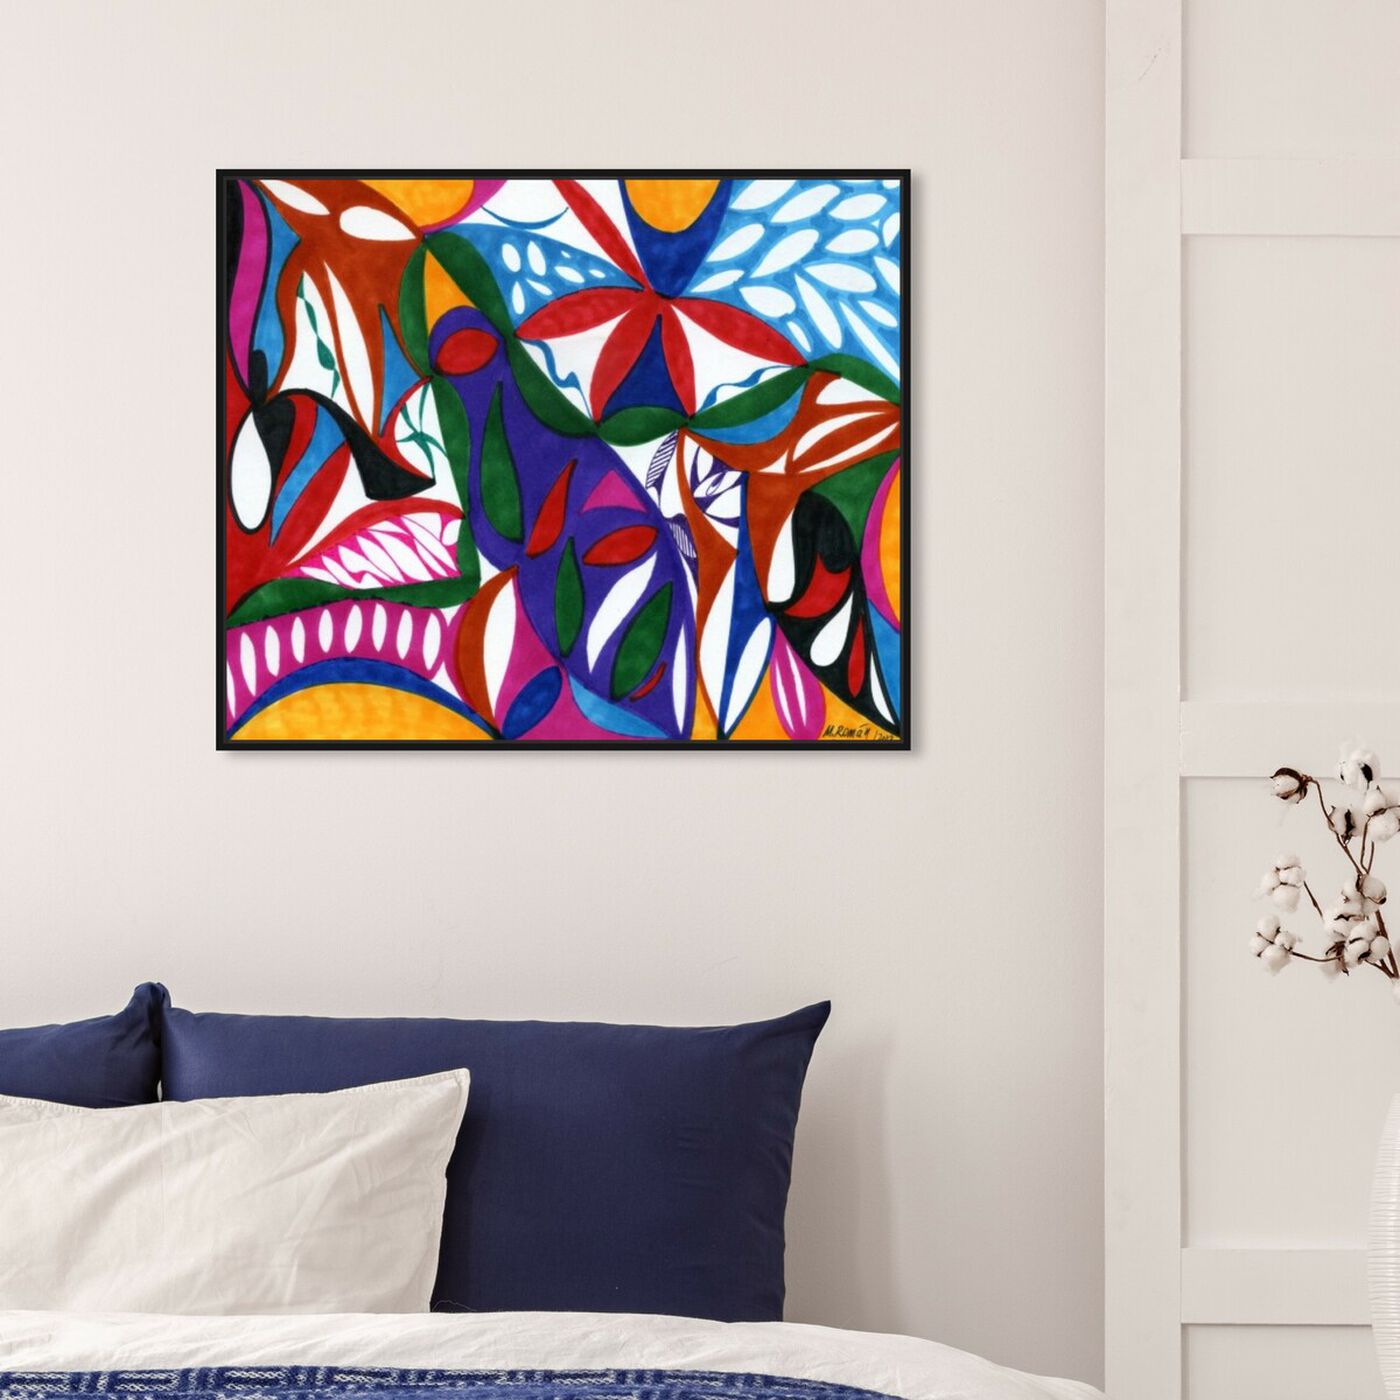 Hanging view of Rhapsodic featuring abstract and geometric art.